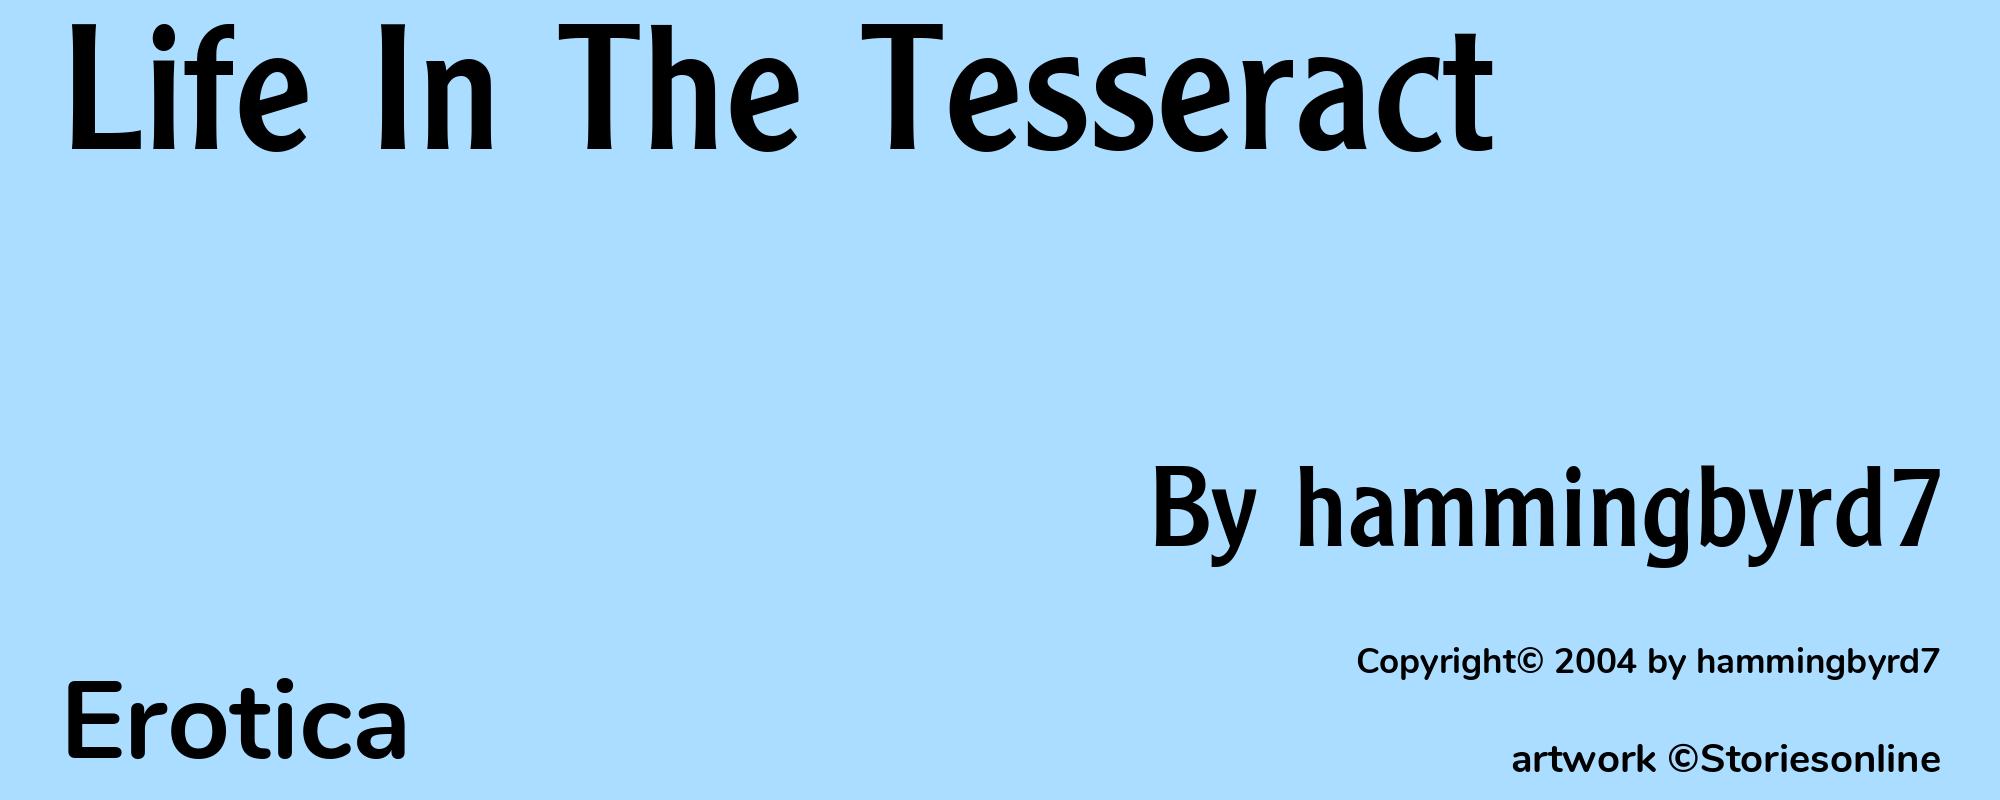 Life In The Tesseract - Cover